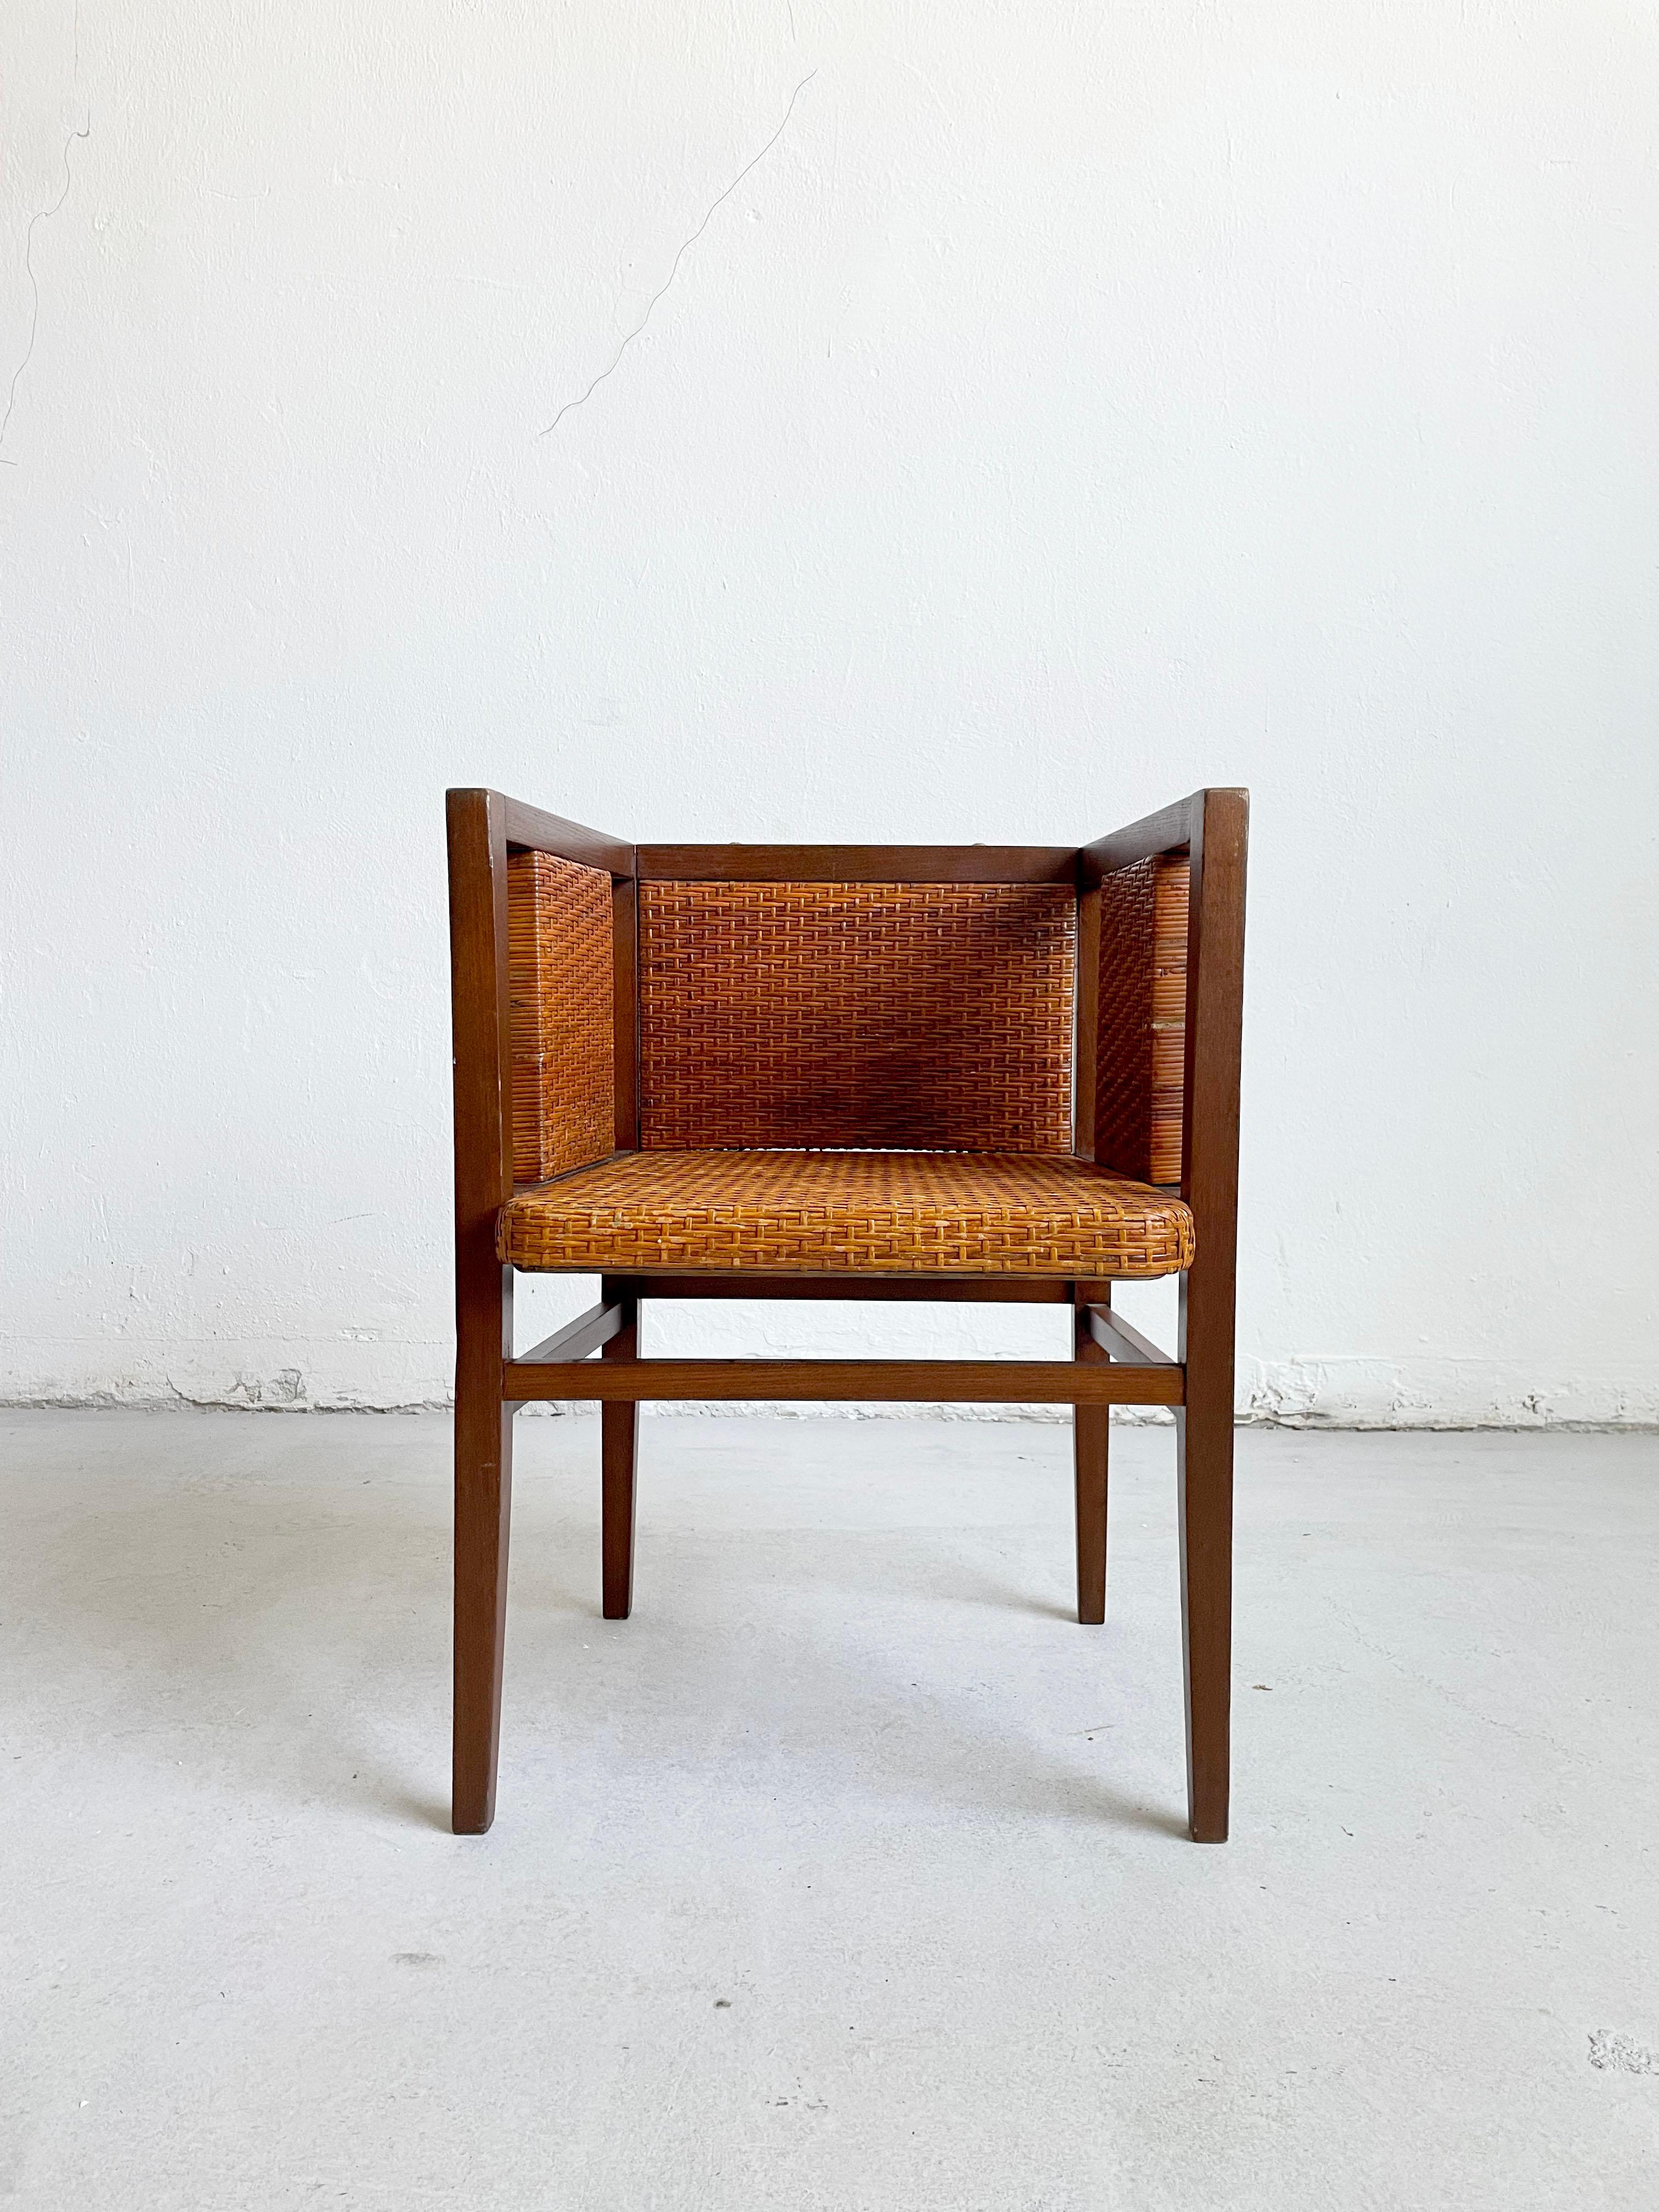 Rare original Austrian Secessionist armchair, designed by the architect and furniture designer, Wilhelm Schmidt, who studied with Joseph Hoffmann at the Wiener Kunstgewerbe. 
This rectilinear chair, made of stained oak with rattan seat, sides and